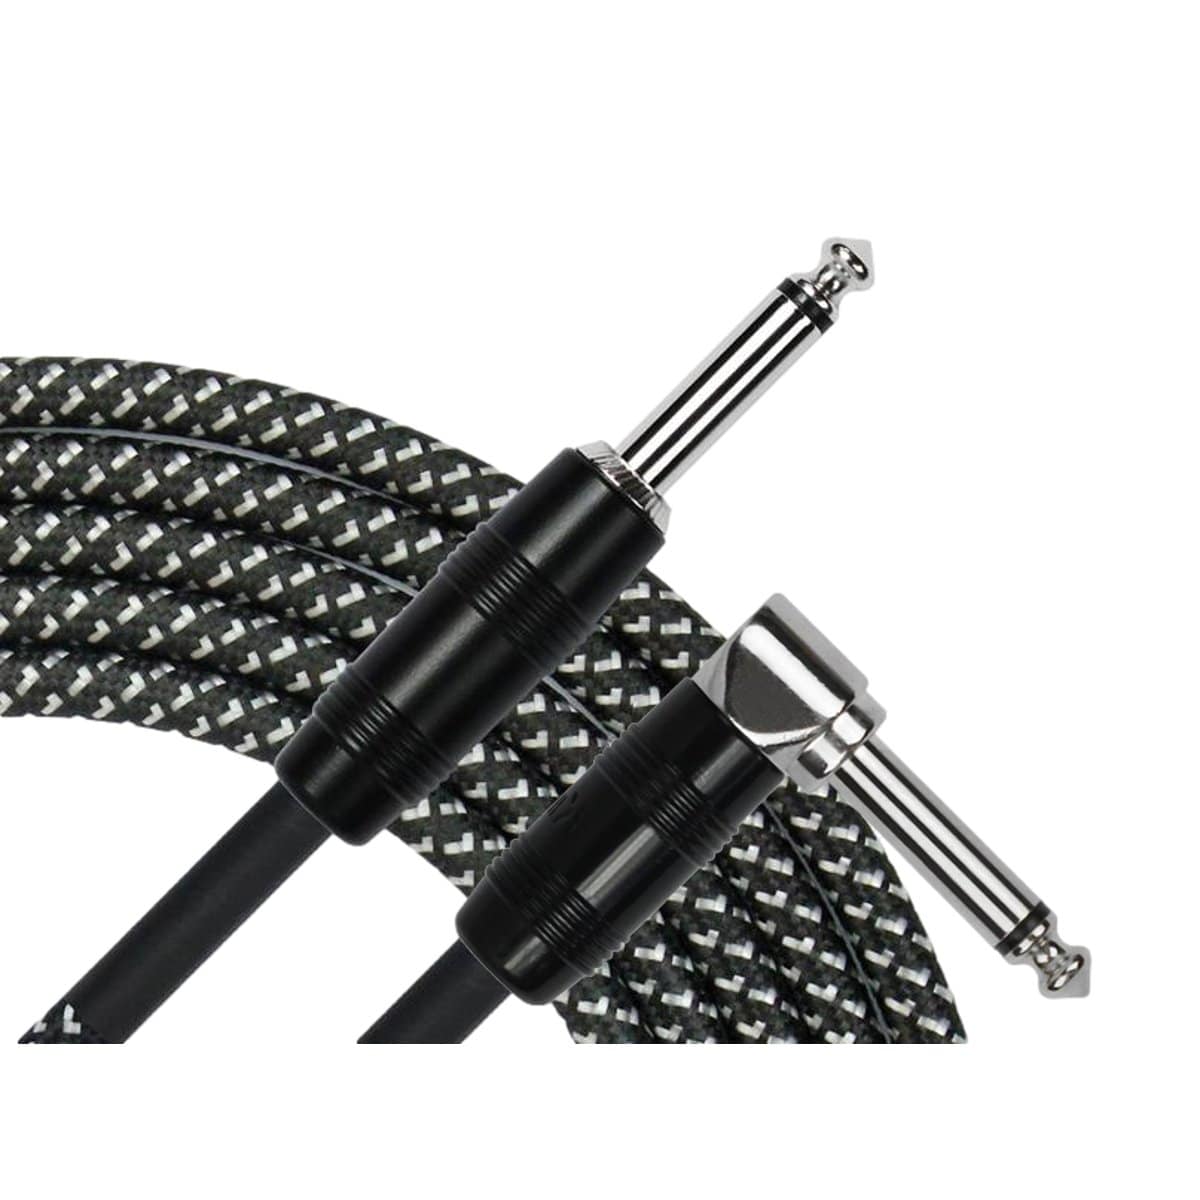 Kirlin Guitar Accessories Kirlin 10FT Guitar Cable Woven Black Right Angle - Straight KIWC202BK-10 - Byron Music